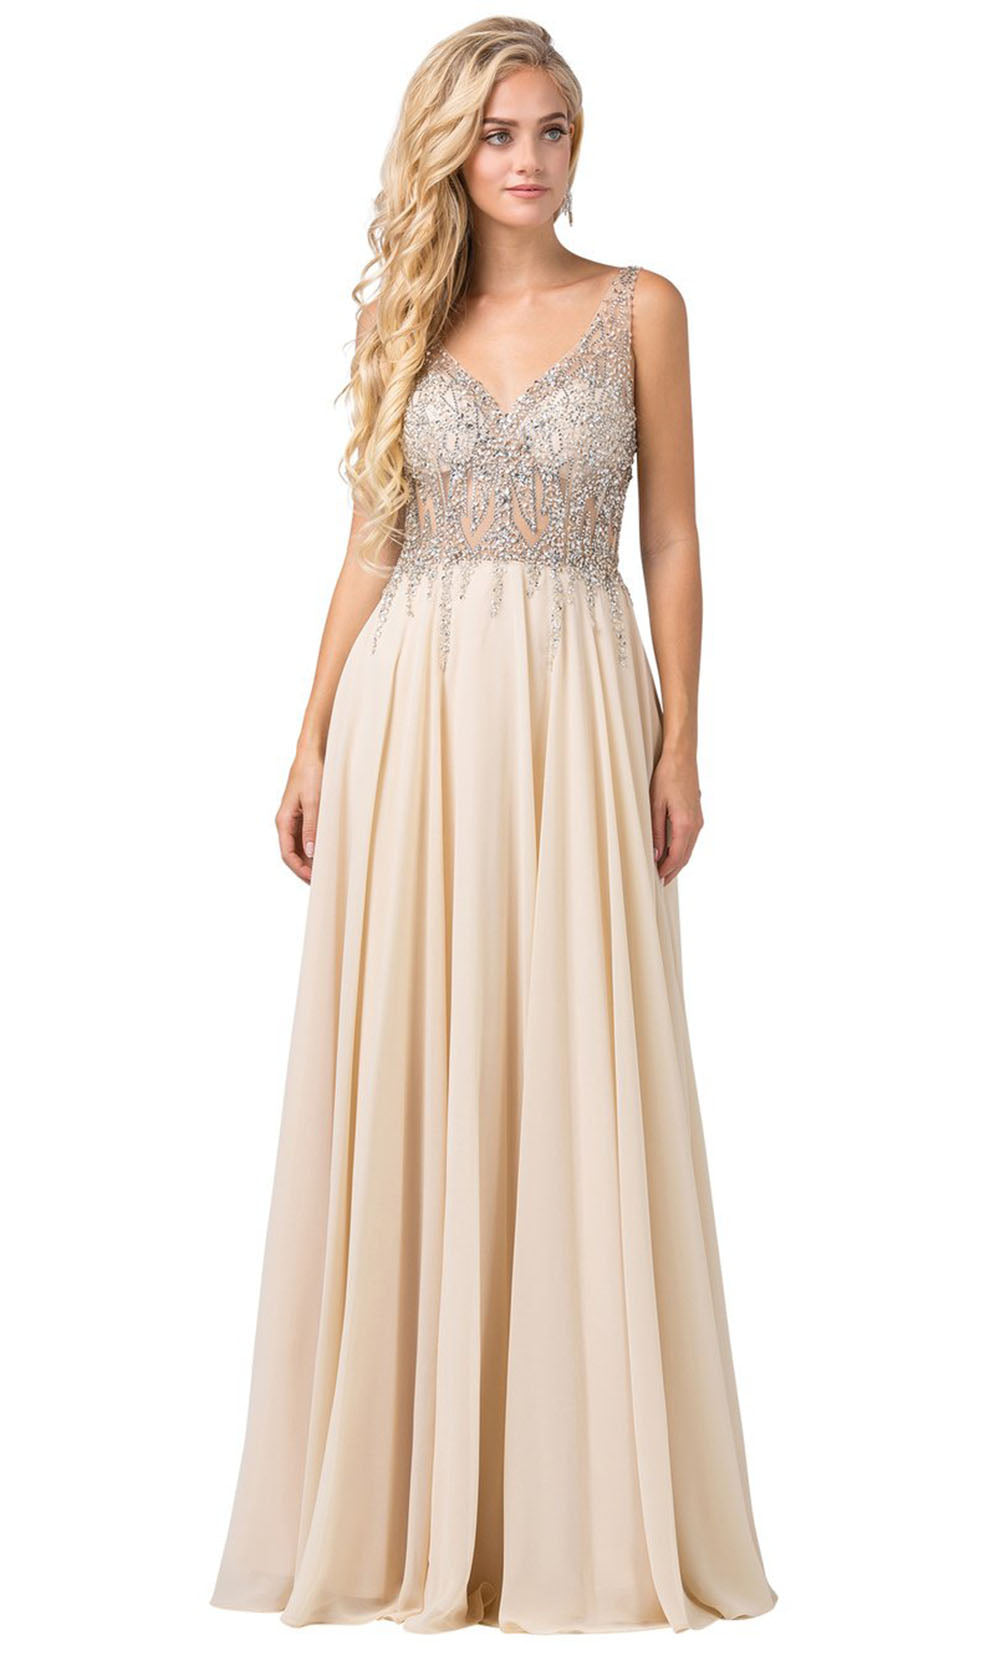 Dancing Queen - 2570 Embellished Sheer Bodice A-Line Gown In Champagne & Gold